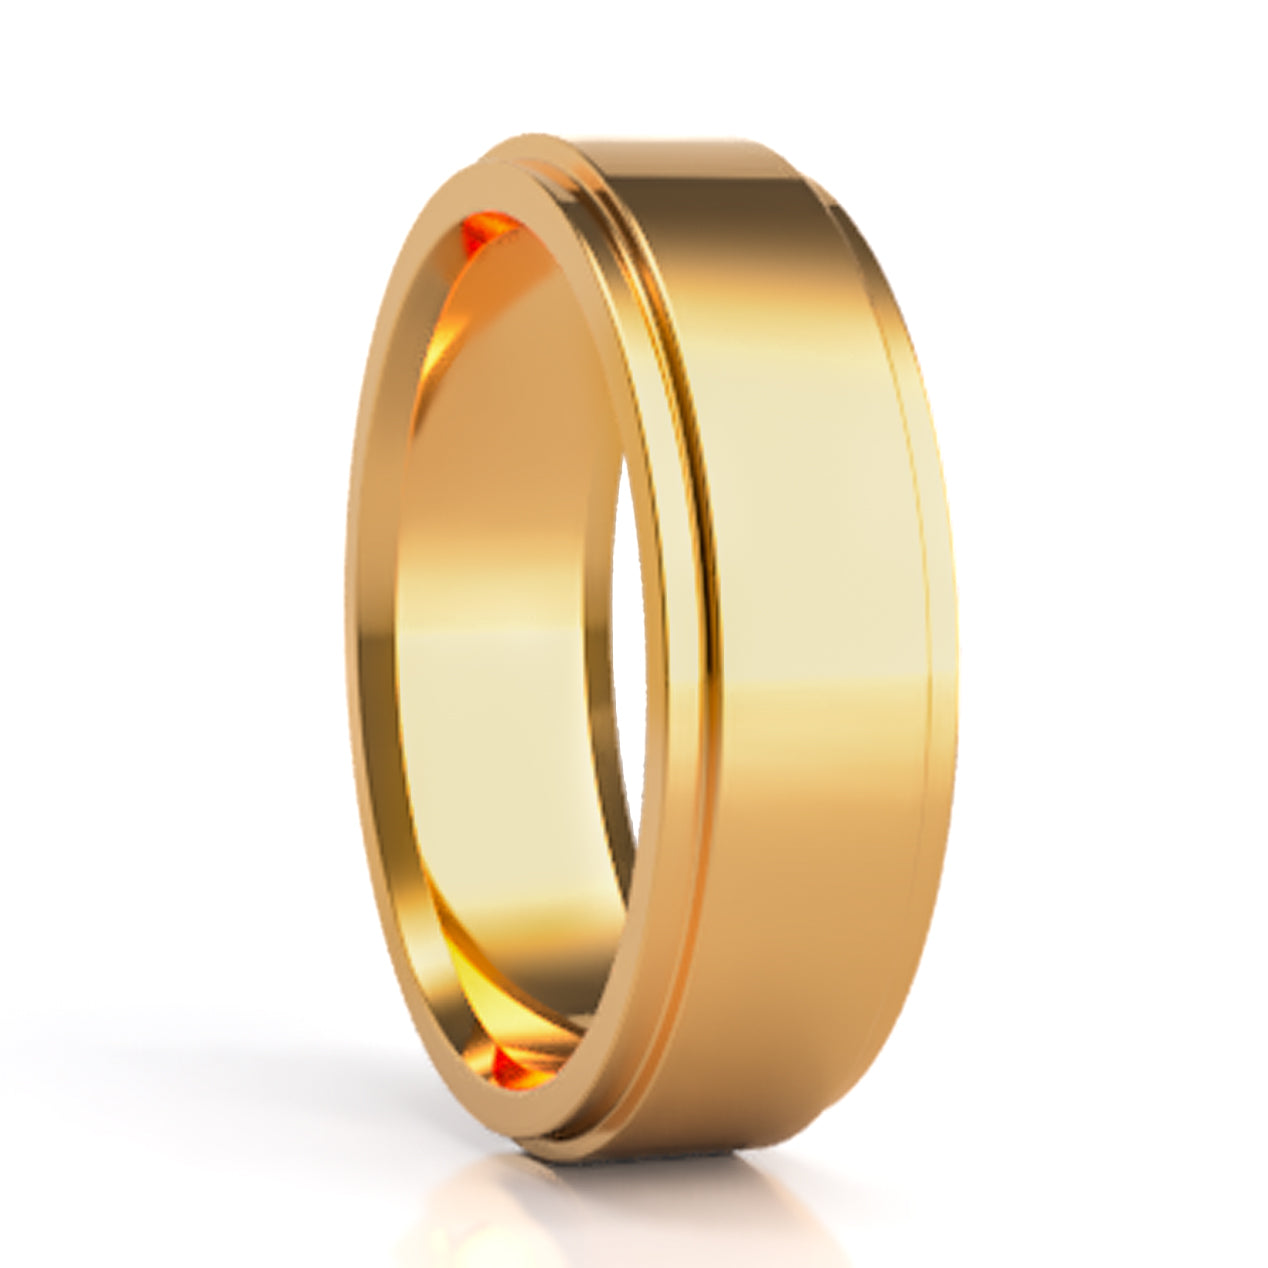 A 18k gold classic wedding band with stepped edges displayed on a neutral white background.